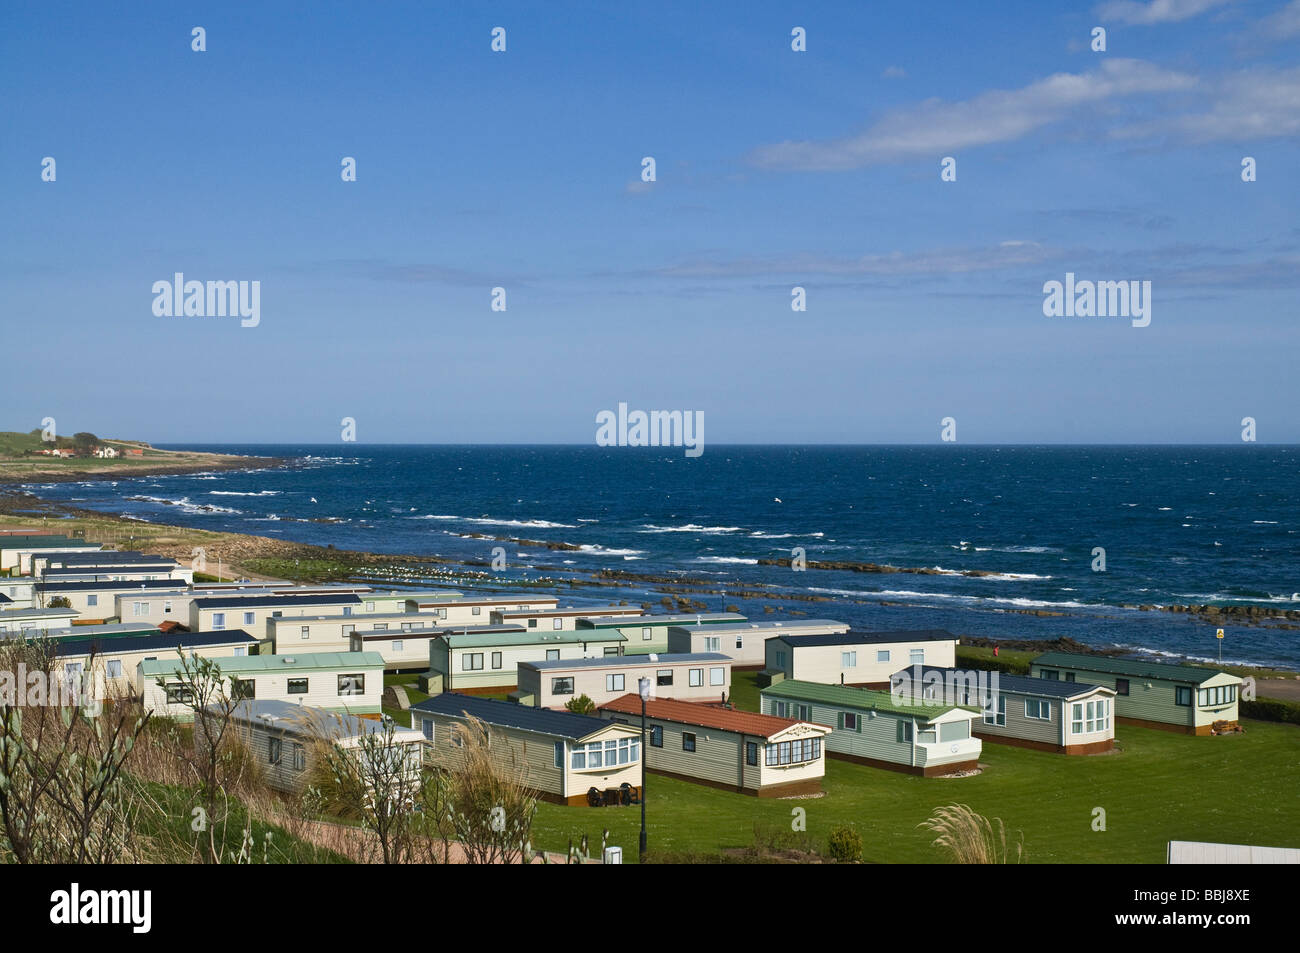 dh Firth of Forth CELLARDYKE FIFE Kilrenny Mill Caravan Park site caravanes statiques maison vacances maisons Ecosse angleterre camping royaume-uni Banque D'Images